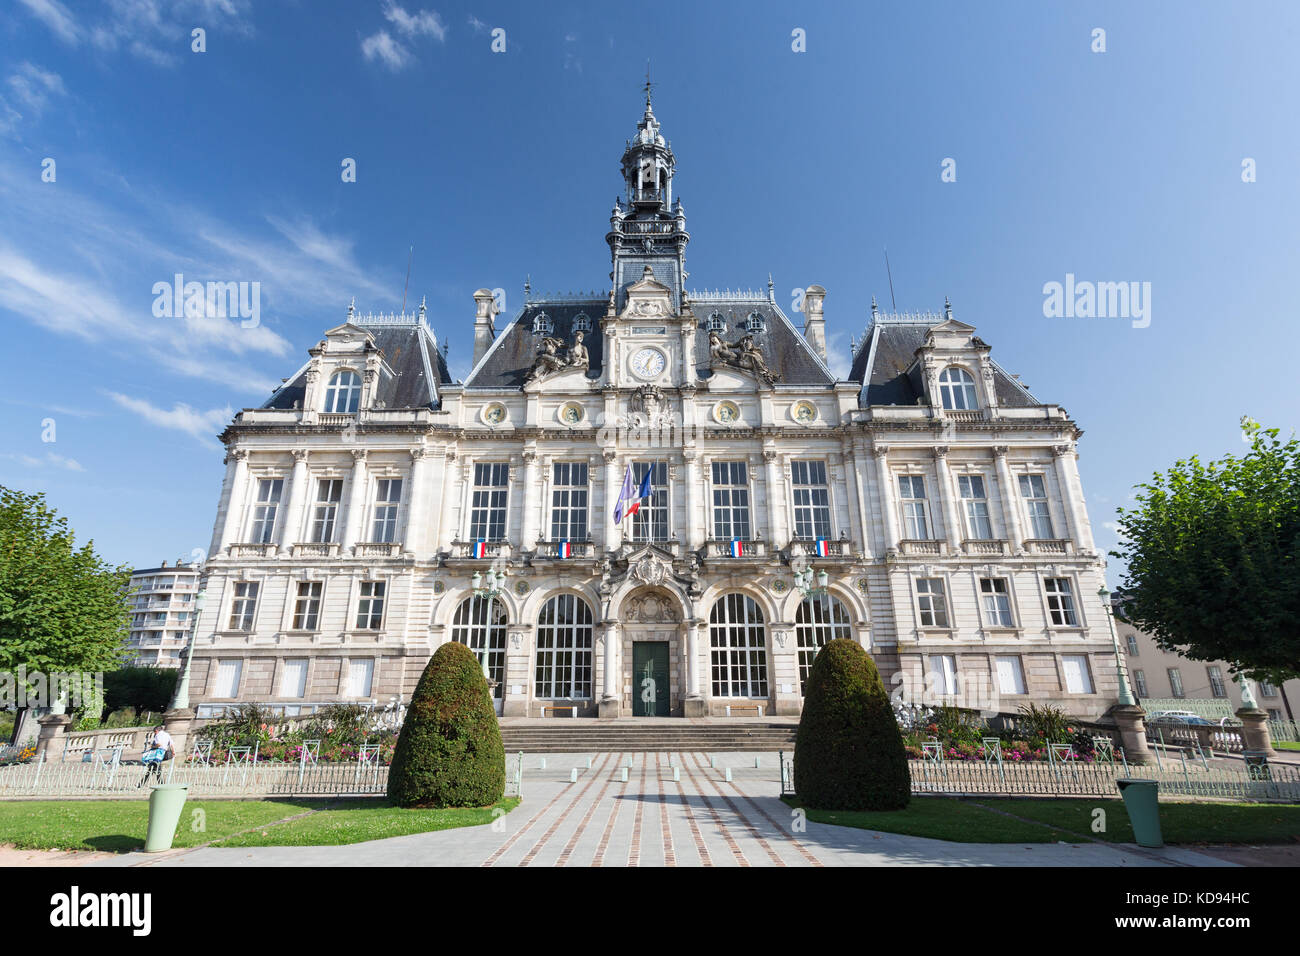 LIMOGES, LIMOUSIN, FRANCE - JULY 2, 2017: The facade of the Neo-Renaissance city or town hall of Limoges. Stock Photo